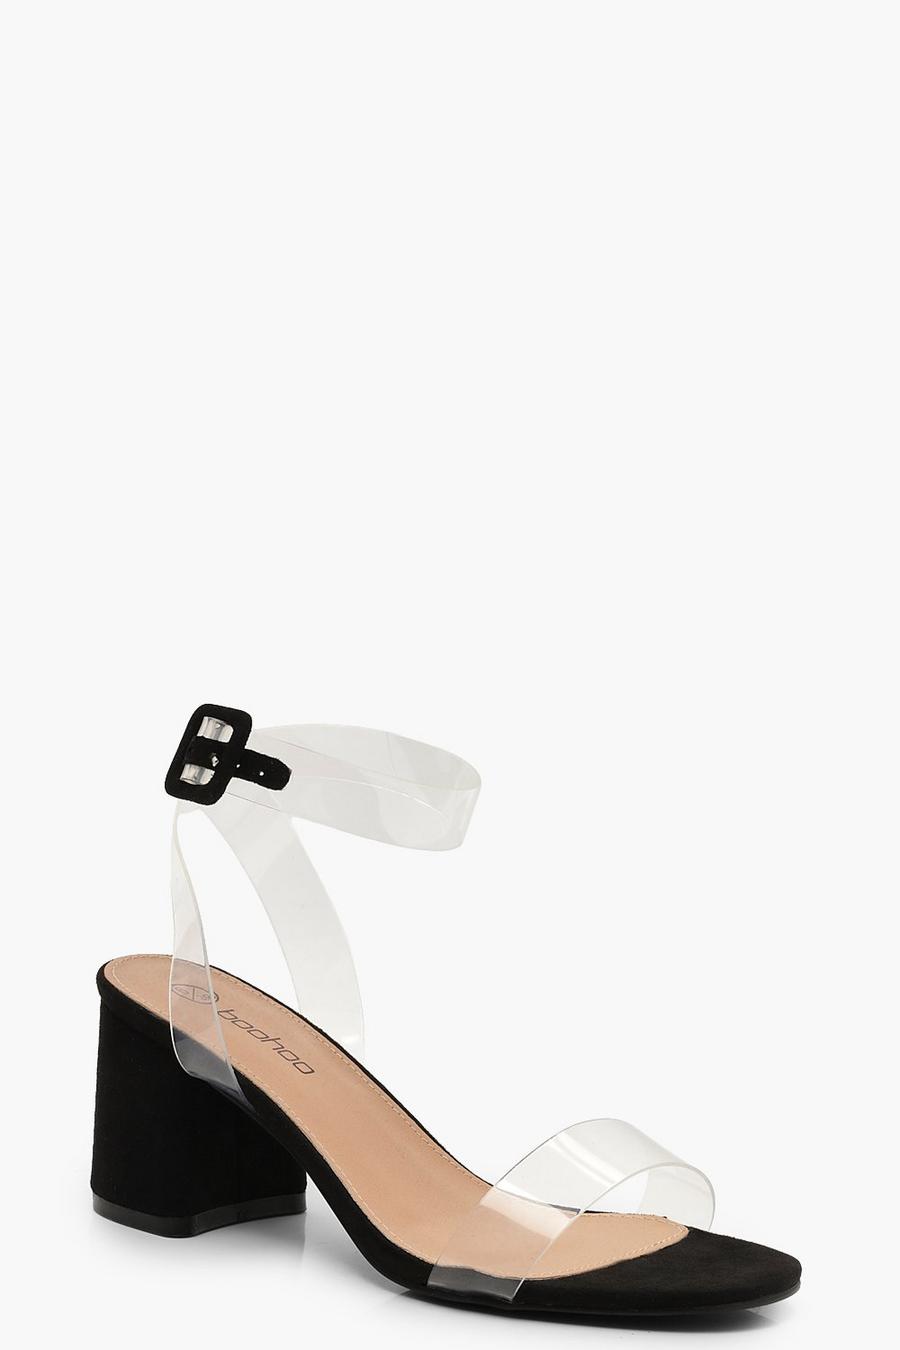 Black Extra Wide Width Clear Strap 2 Part Heels image number 1